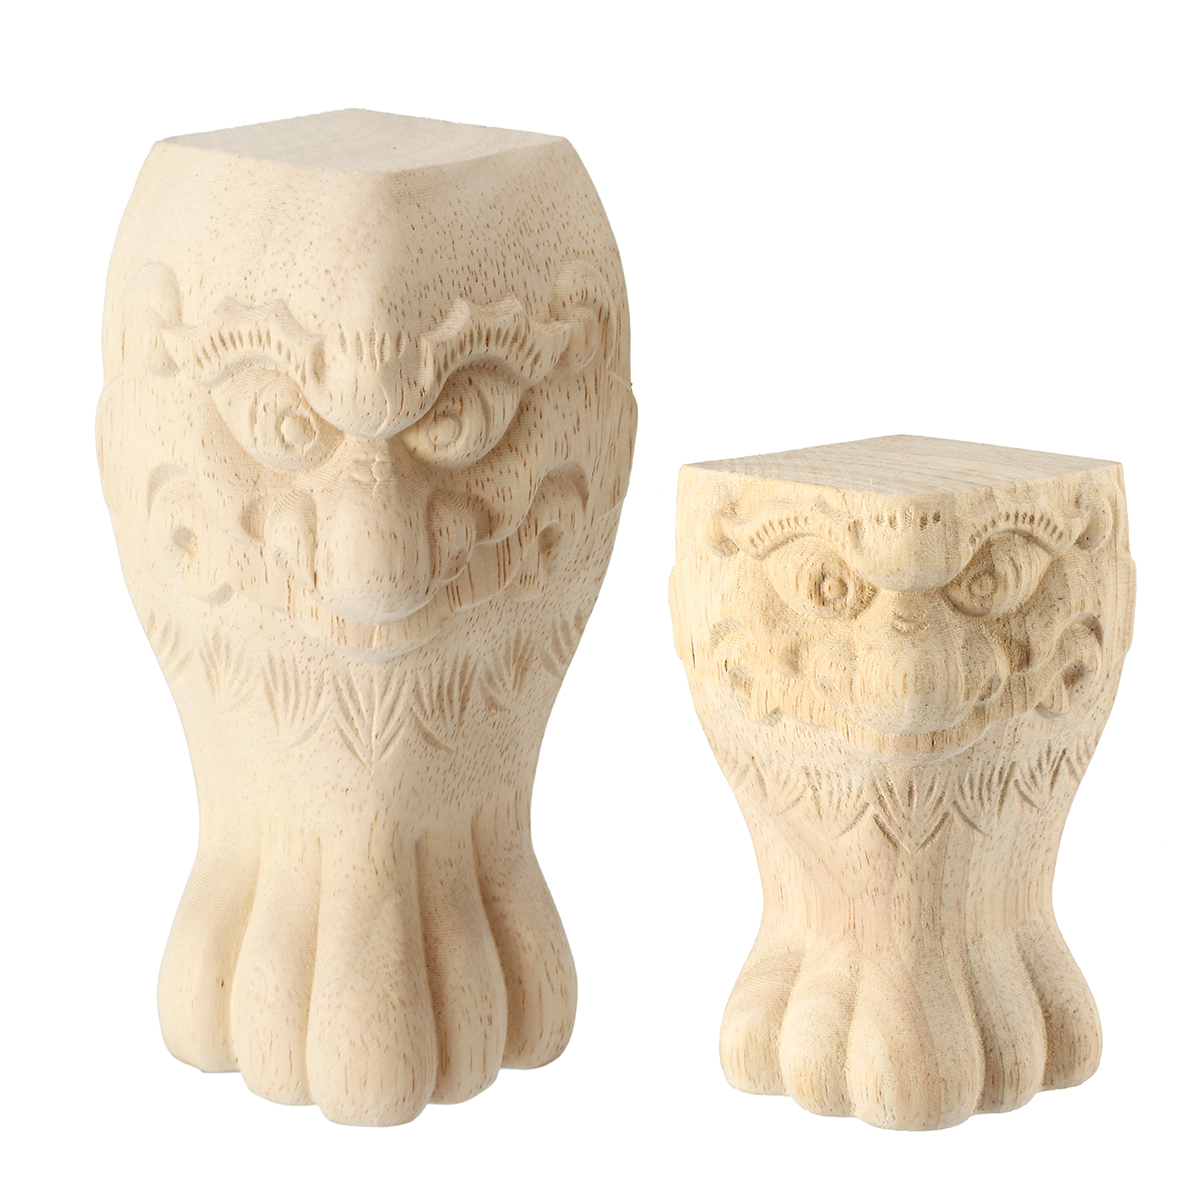 4Pcs-1015cm-European-Solid-Wood-Carving-Furniture-Foot-Legs-Unpainted-Cabinet-Feets-Wood-Decal-1322664-1